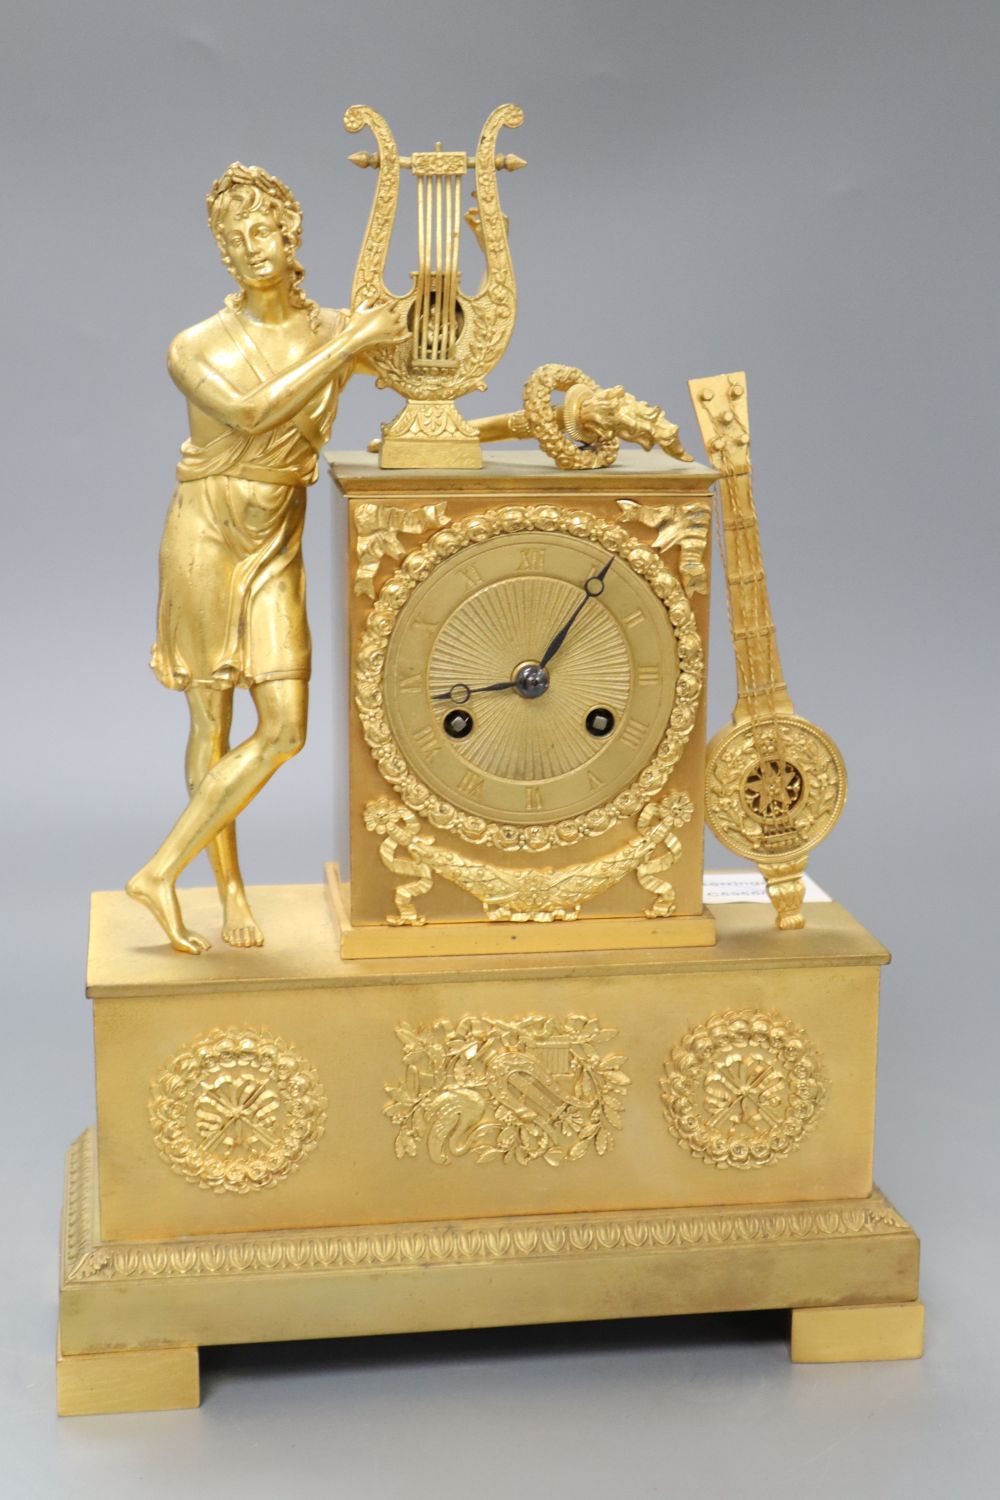 A French Empire design ormolu eight day mantel clock, the case surmounted with a Grecian figure playing a lyre, height 31cm